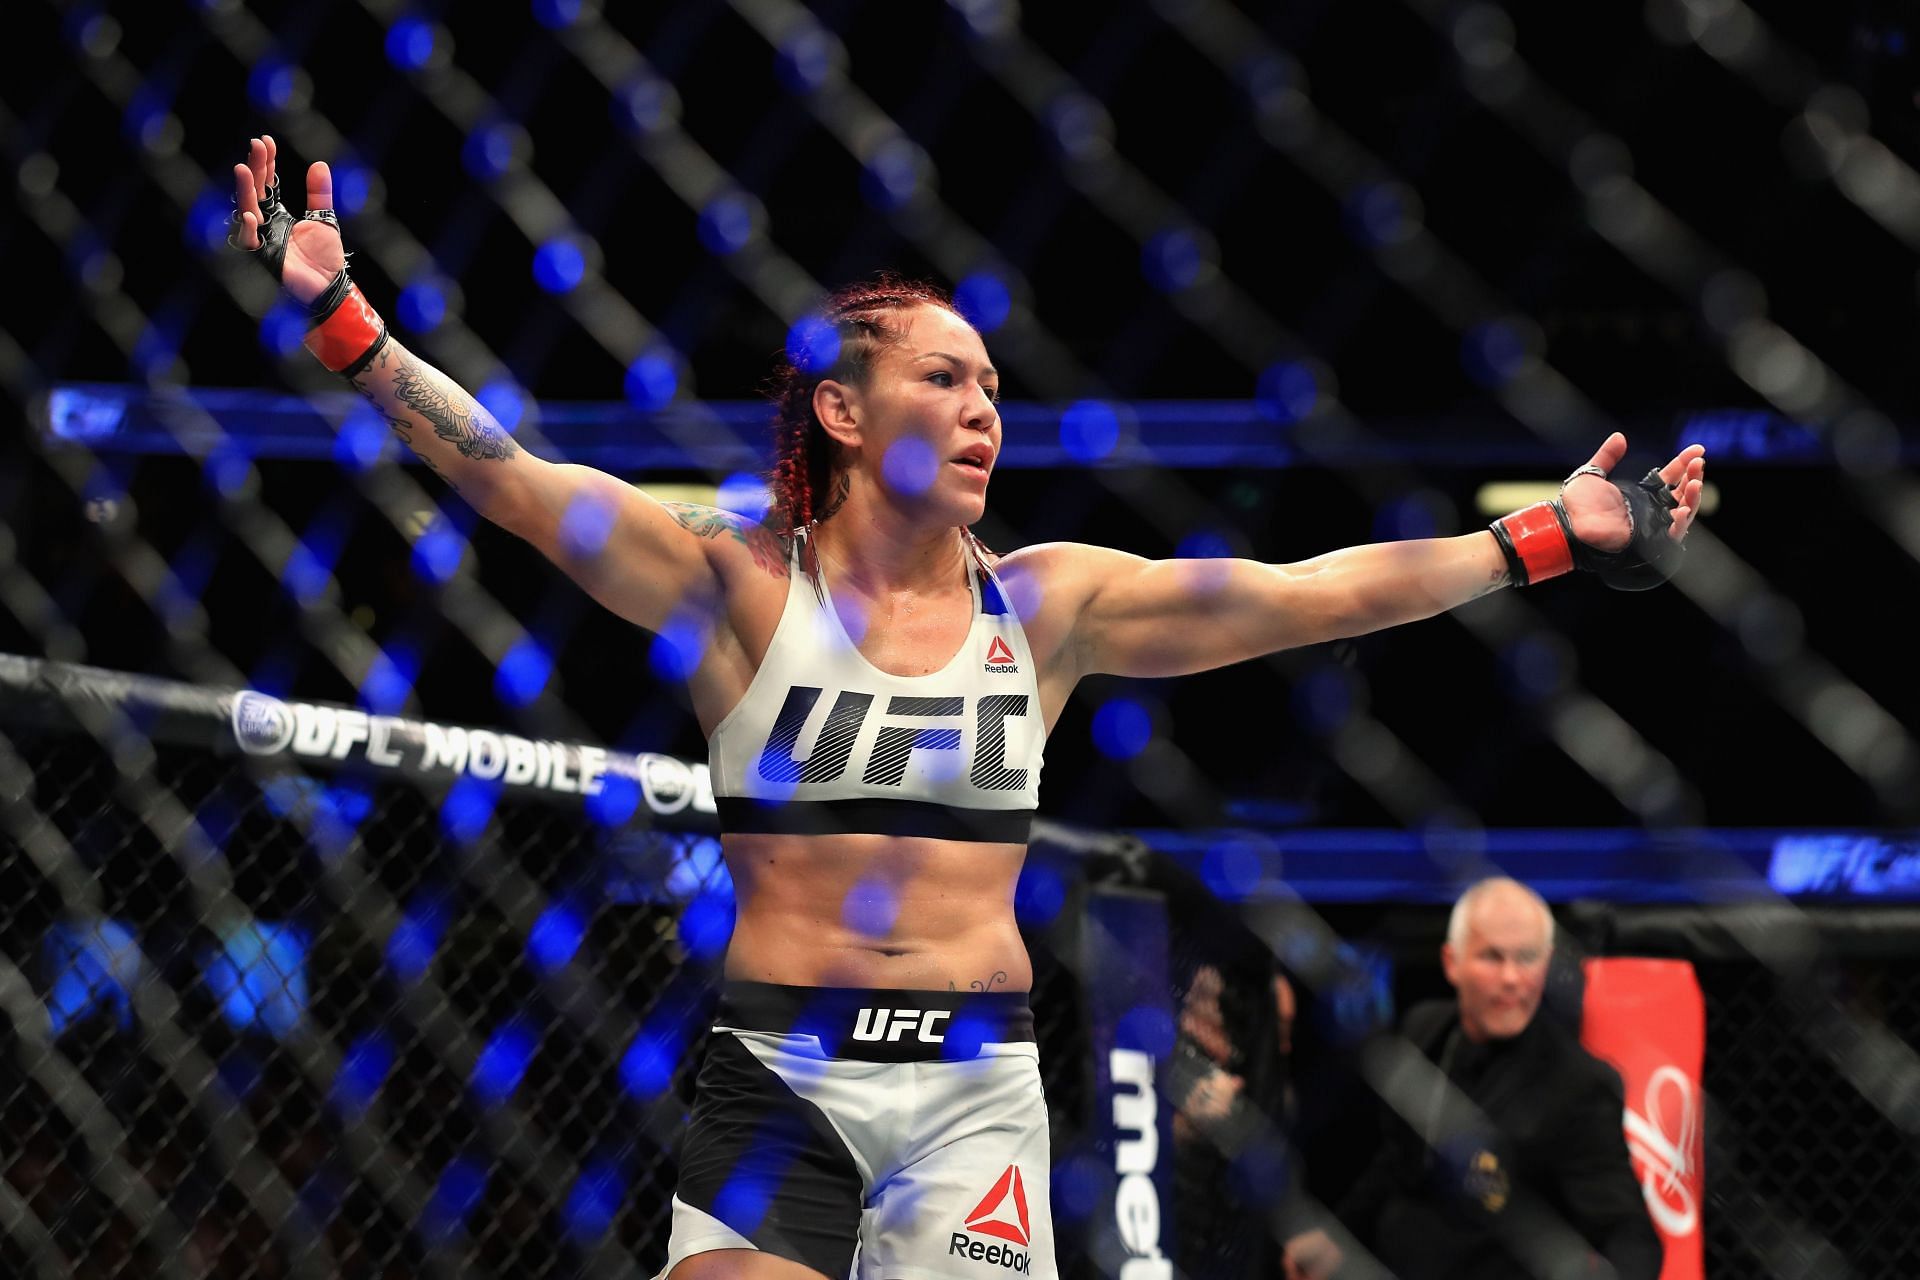 Cris Cyborg after her victory at UFC 214